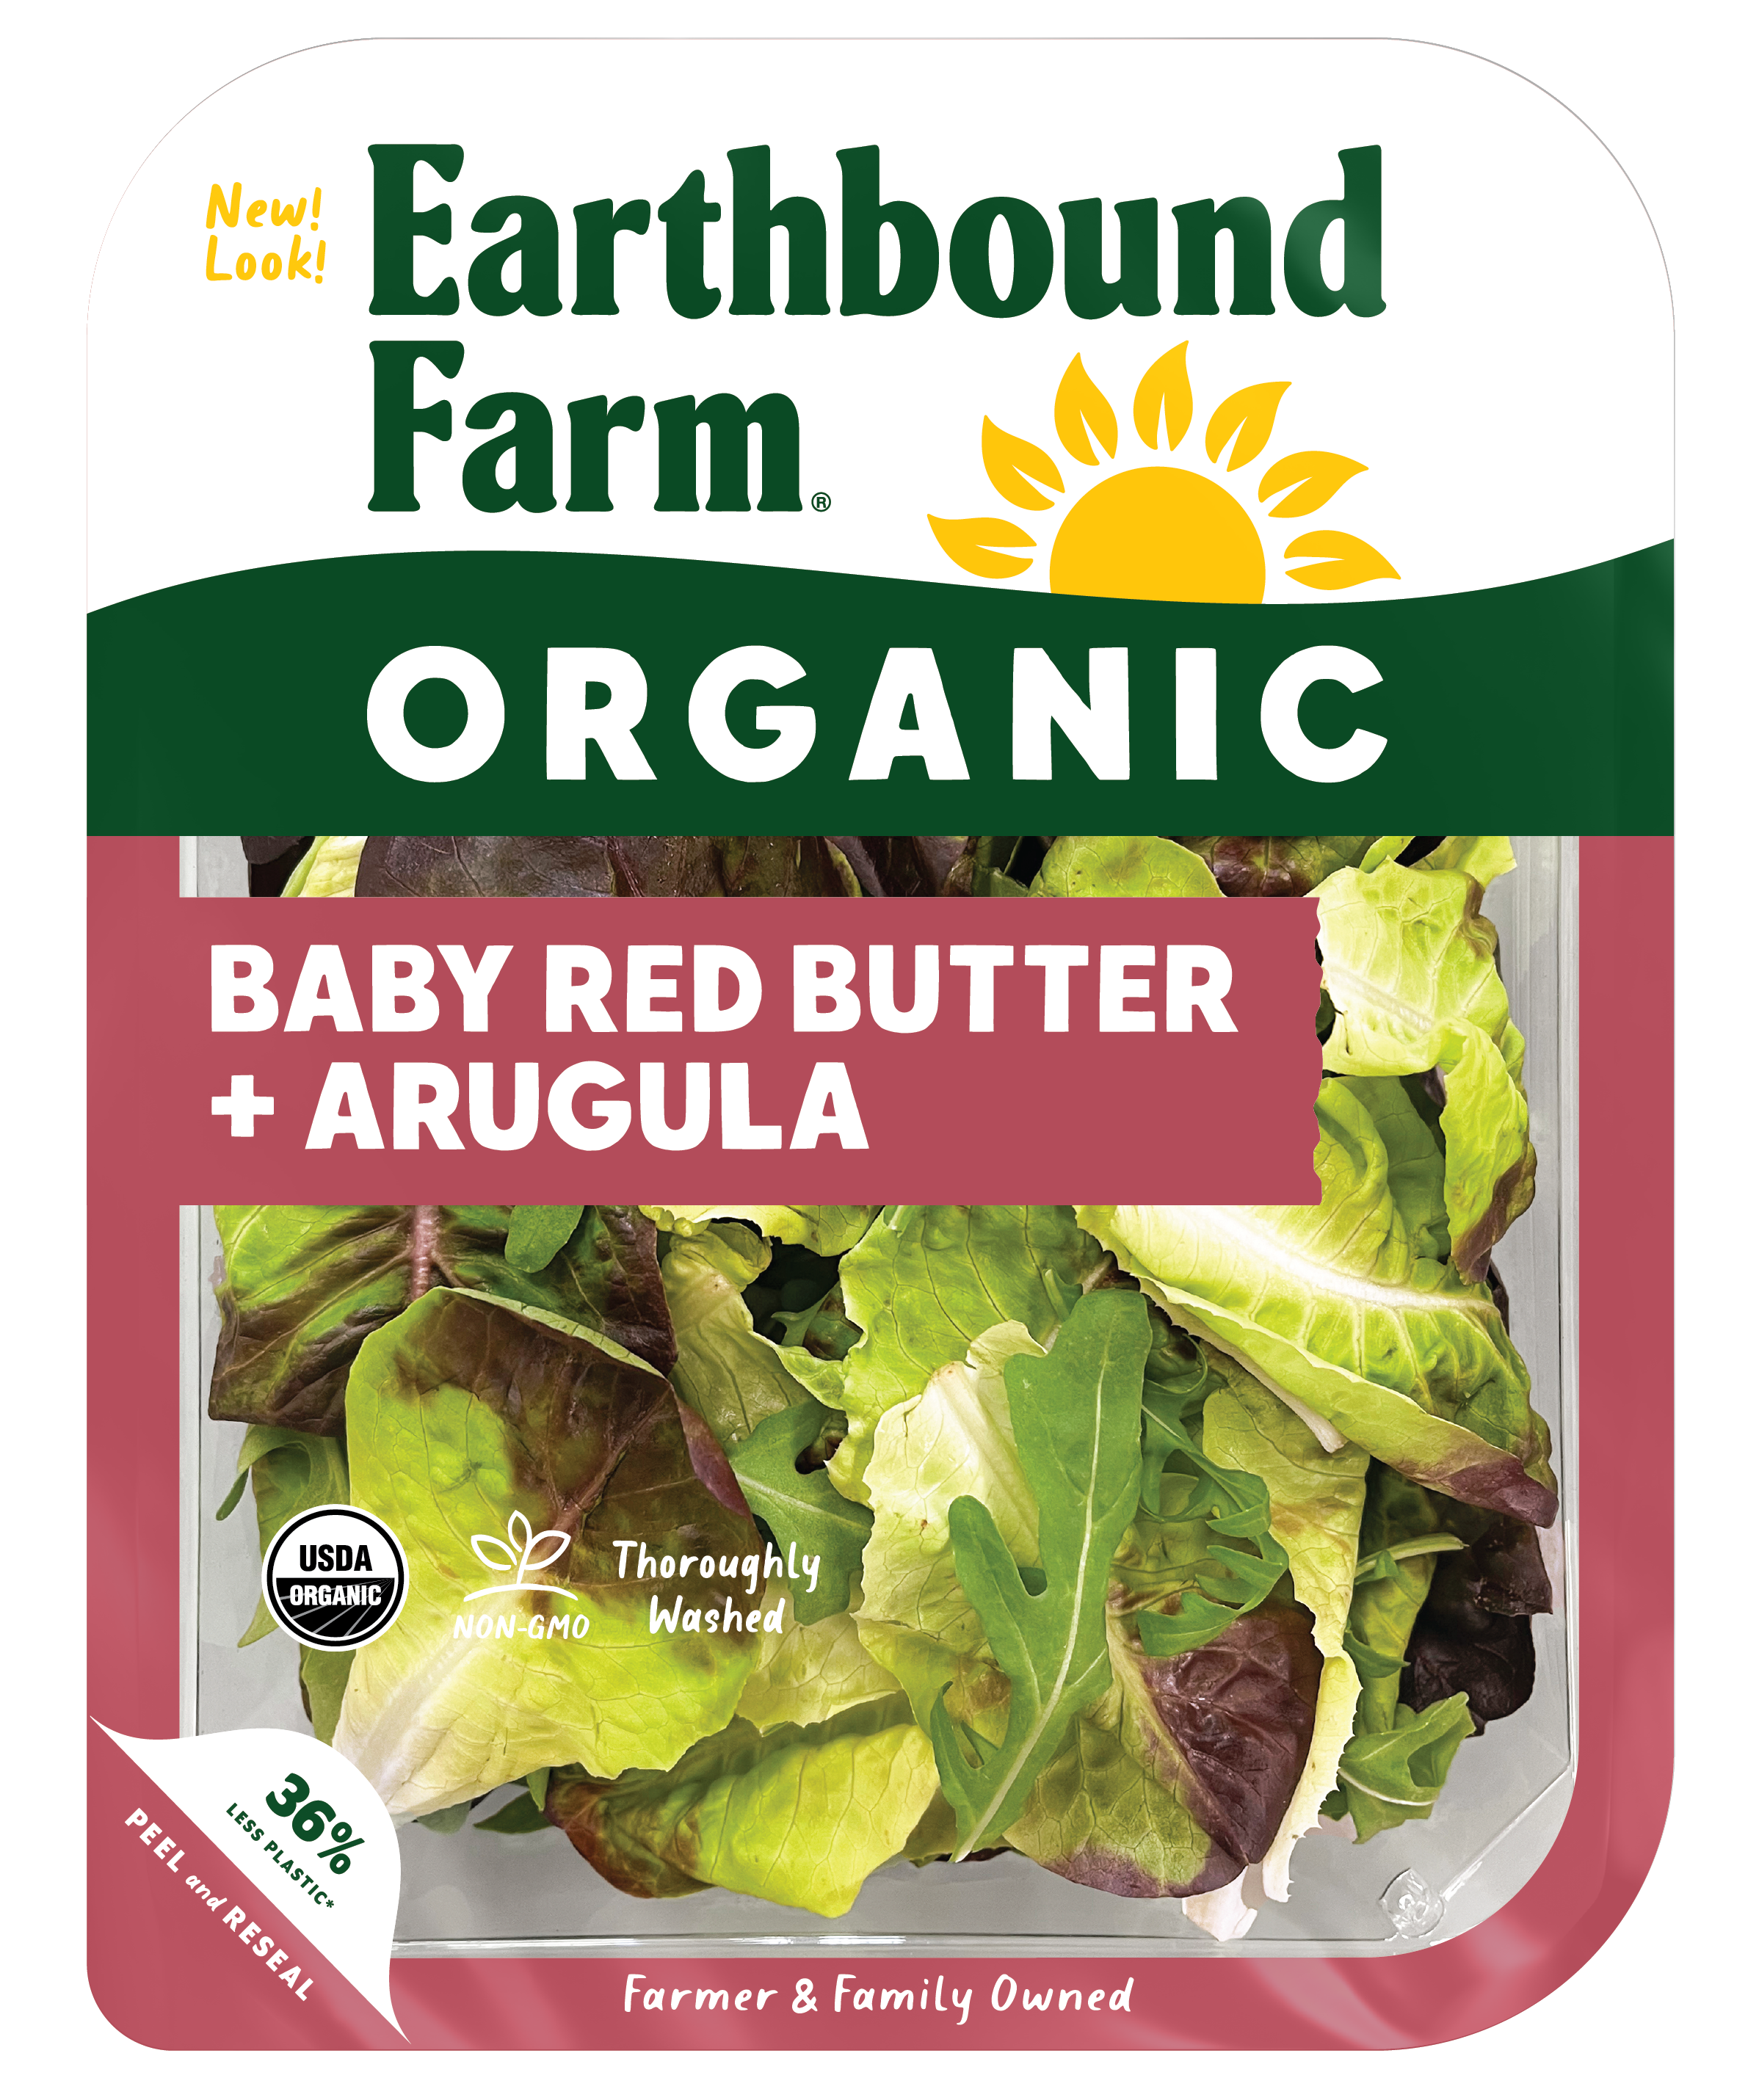 Baby Red Butter + Arugula